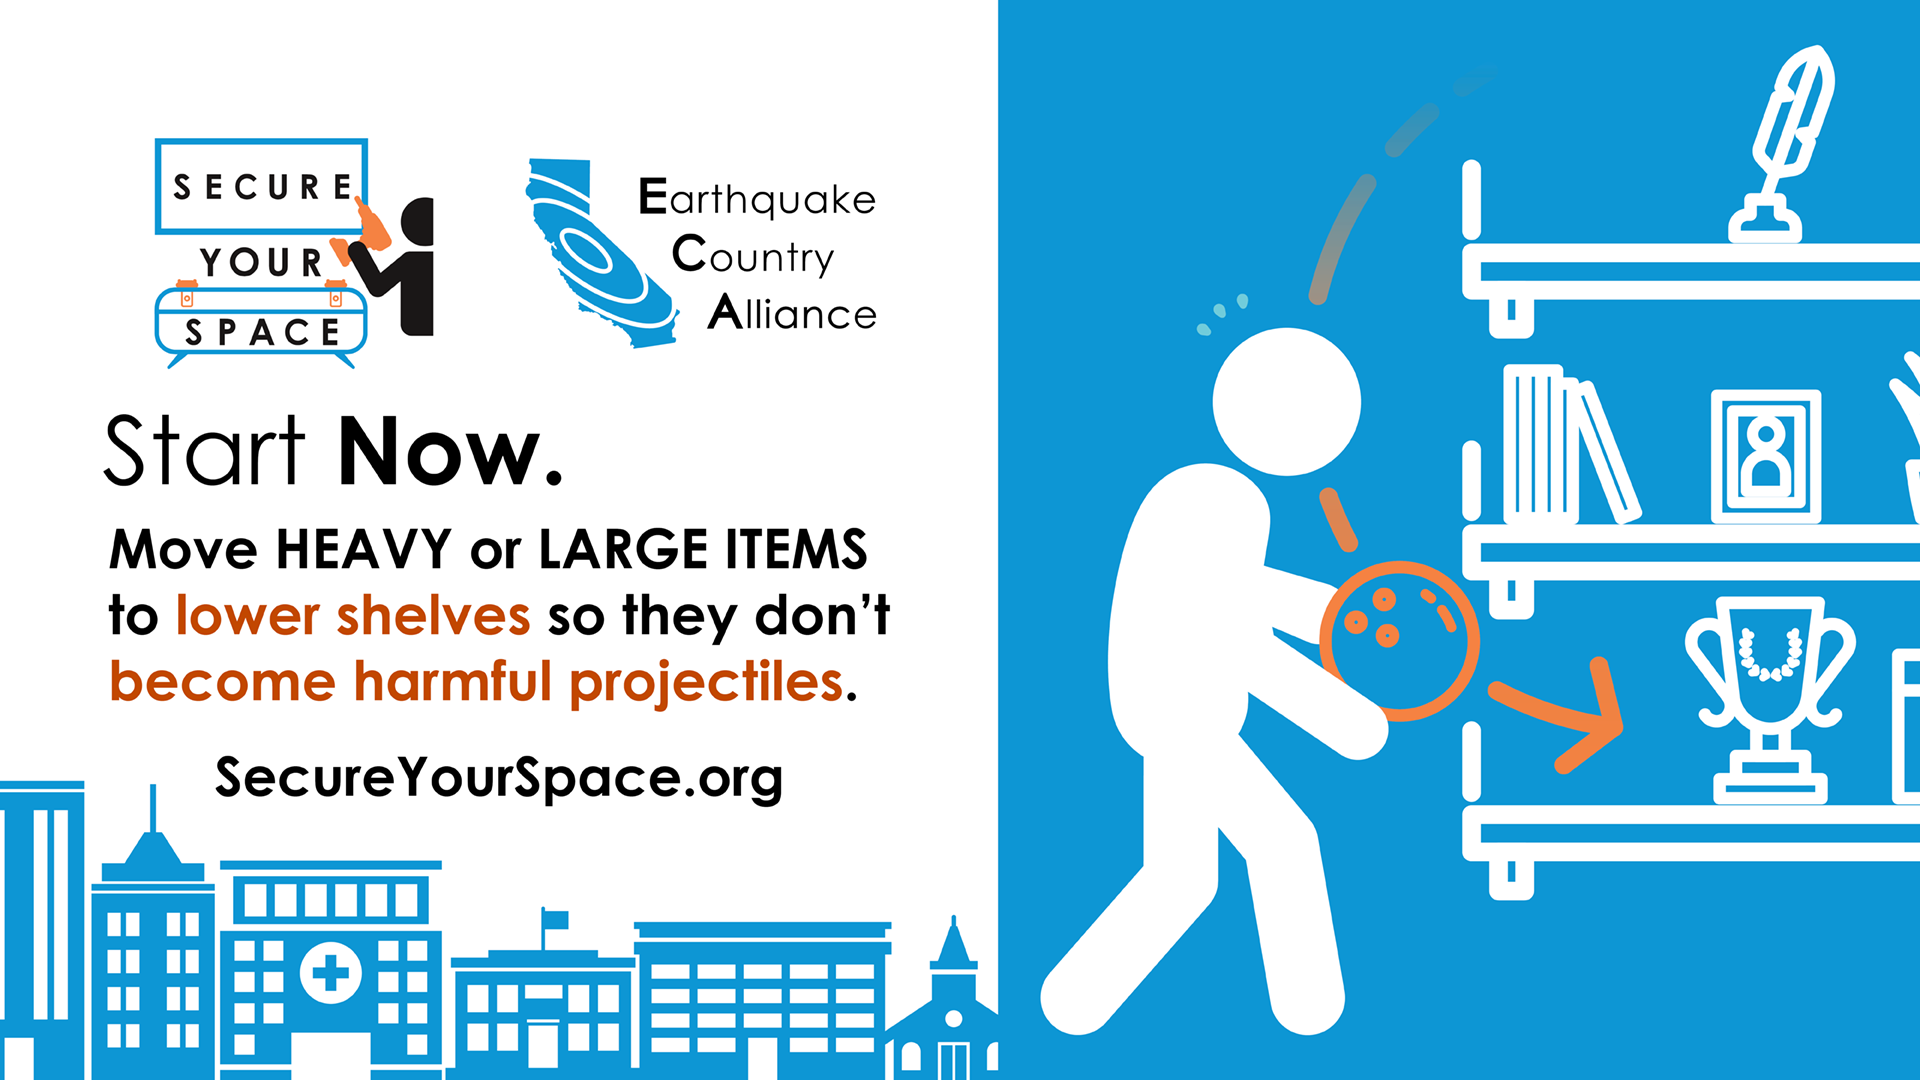 Graphic showing how to secure heavy objects for earthquake shaking by moving them to lower shelves, and promoting SecureYourSpace.org.